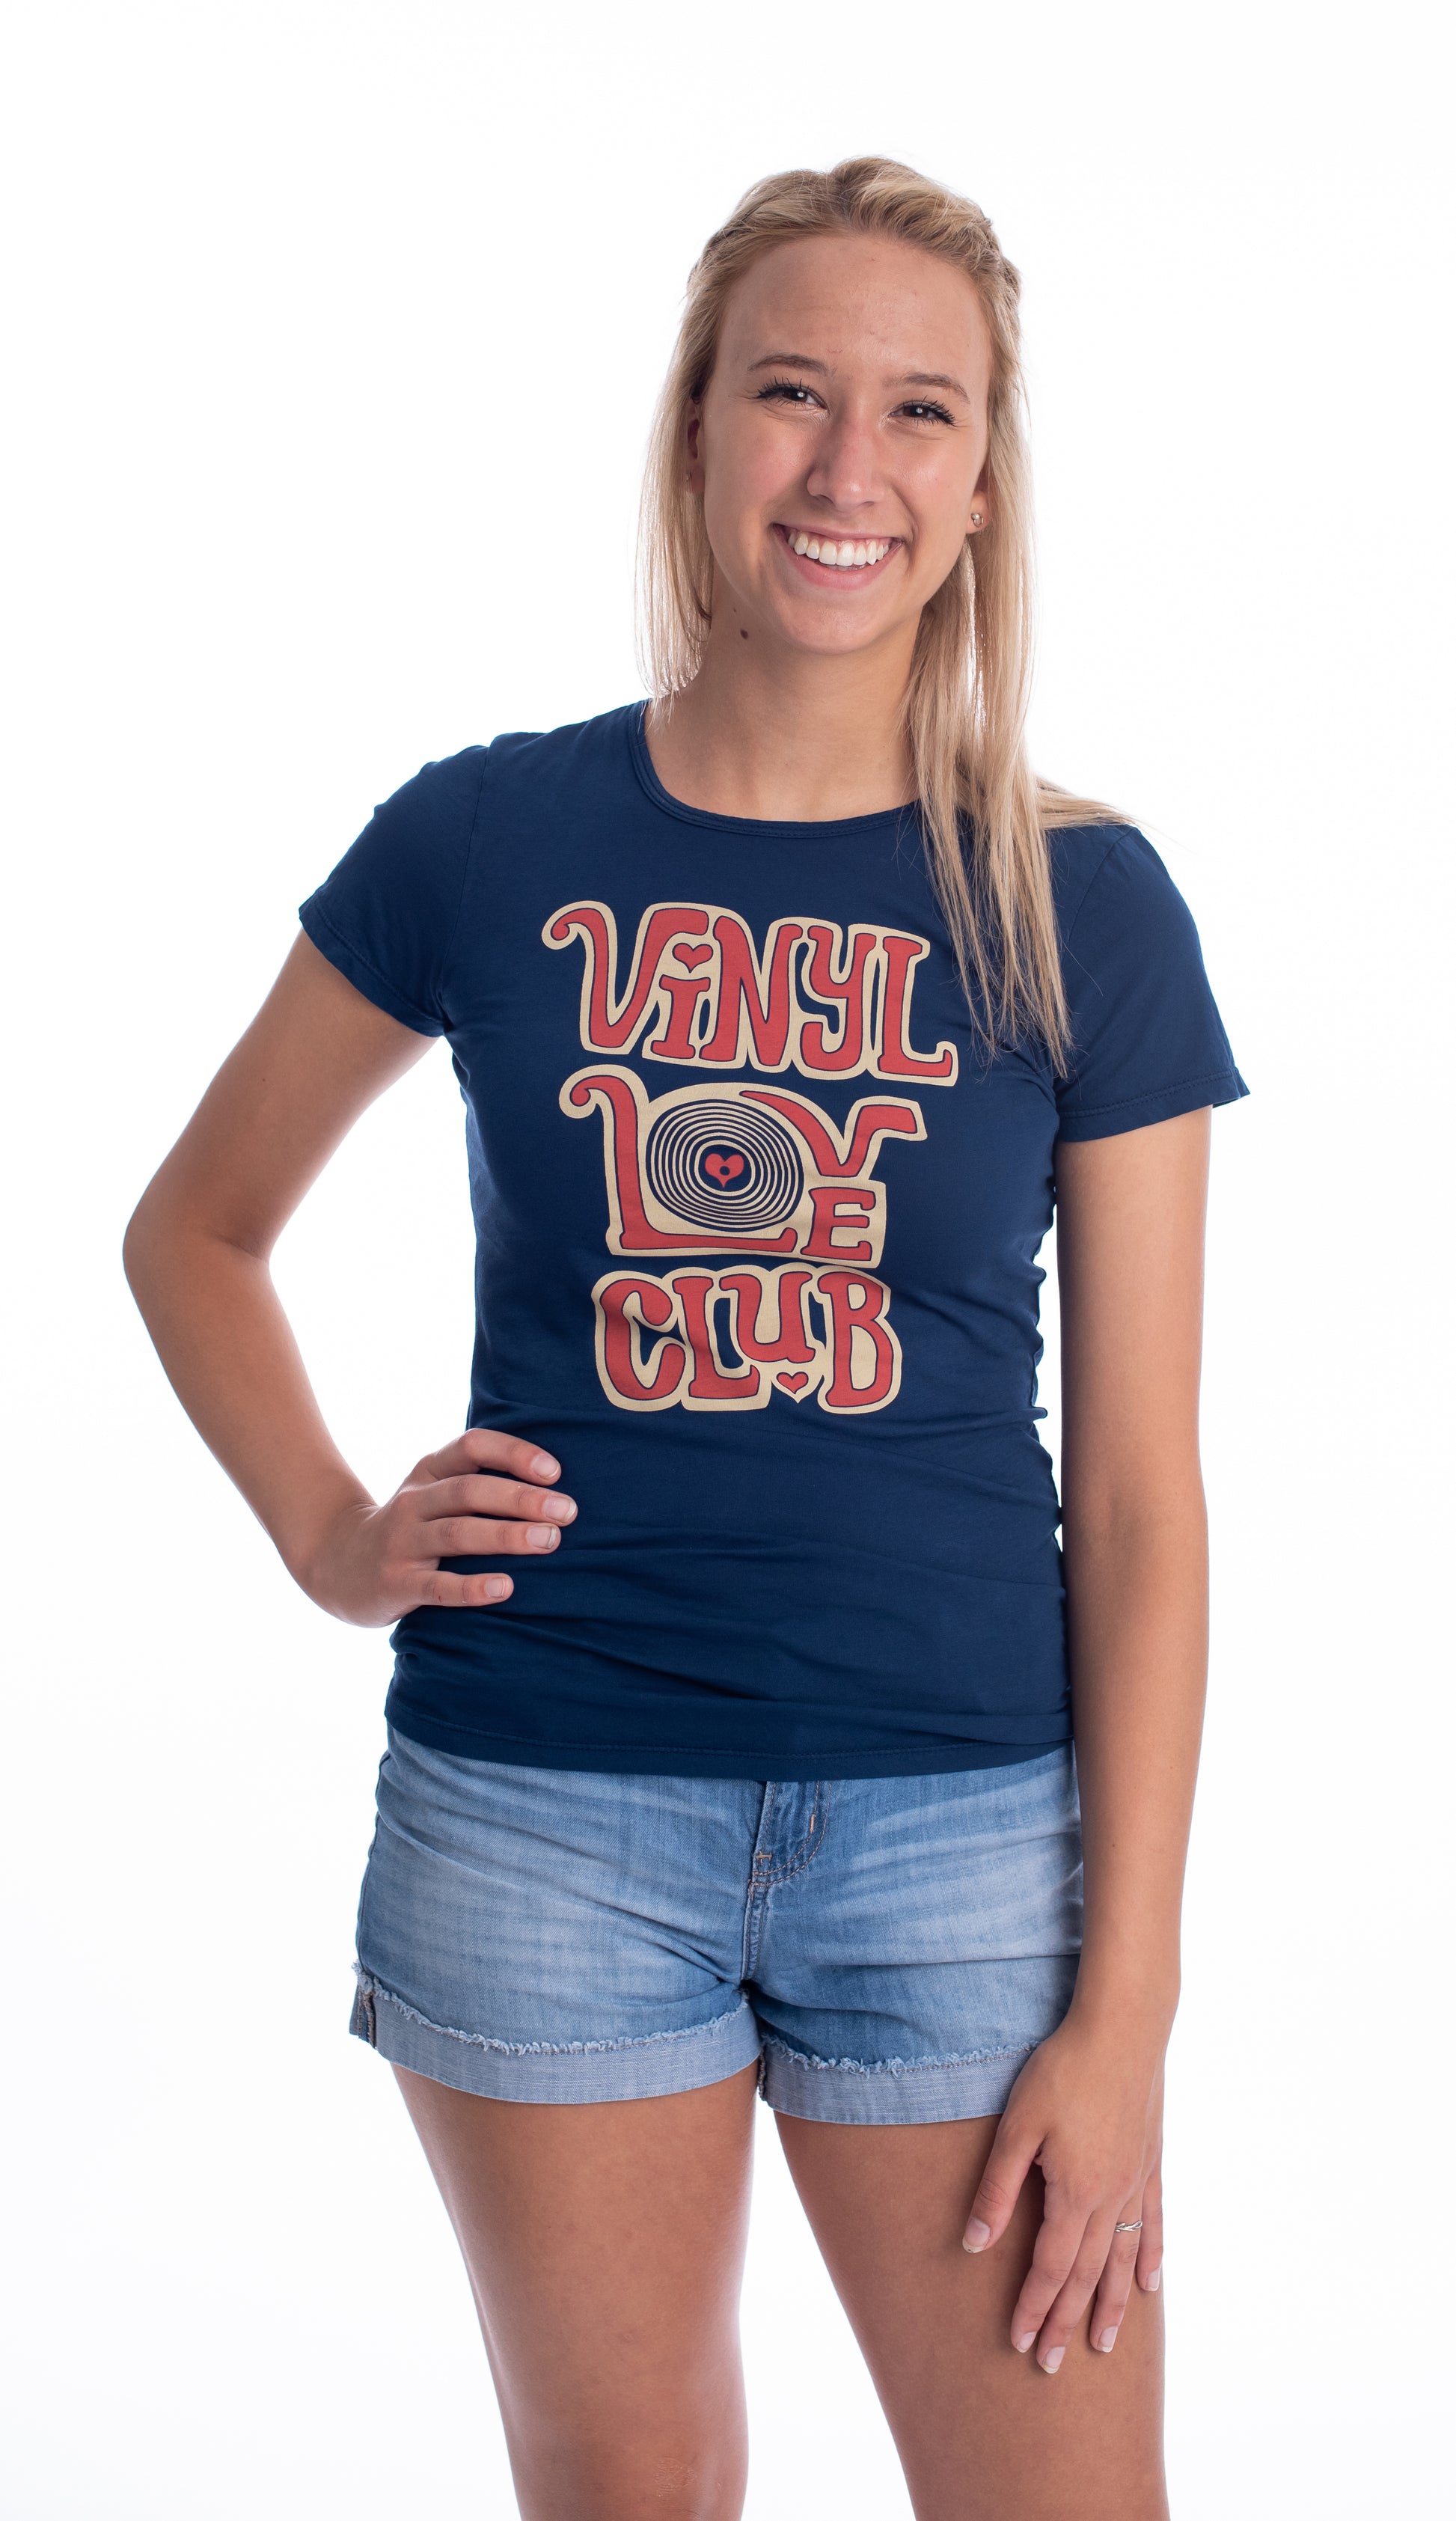 Navy blue graphic tee with "Vinyl Love Club" text in red and off white on blonde model in jean shorts